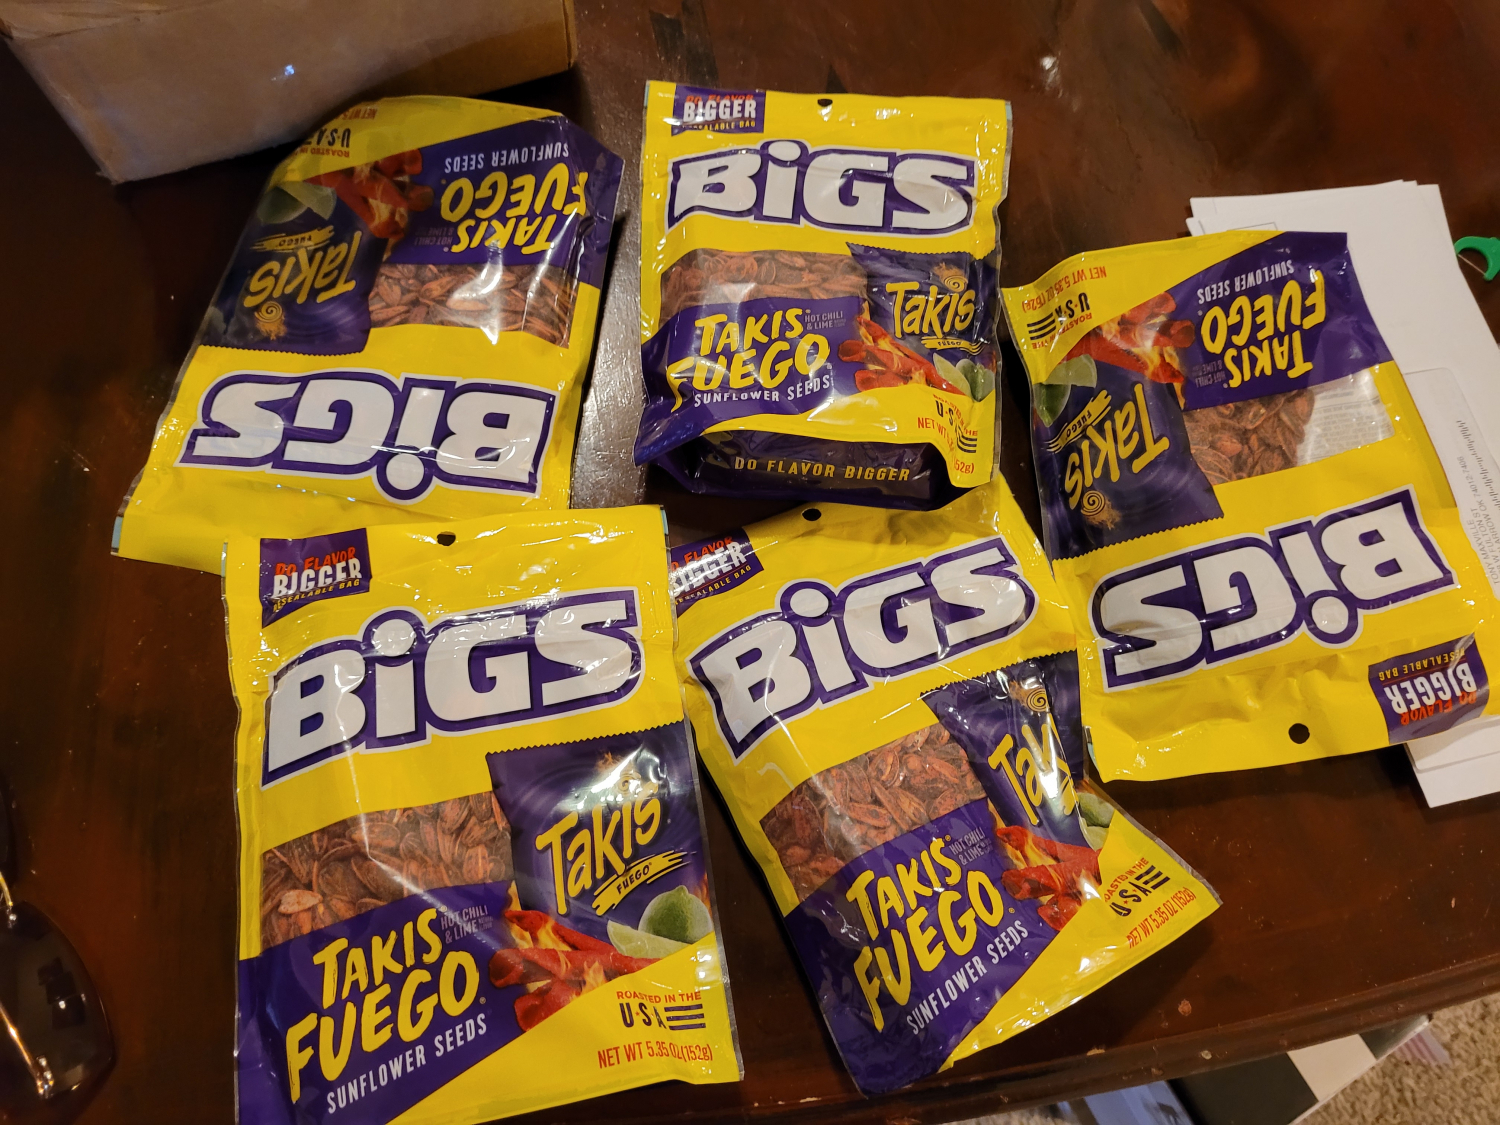 Bigs Takis Fuego Takis Fuego Sunflower Seeds - Shop Nuts & Seeds at H-E-B